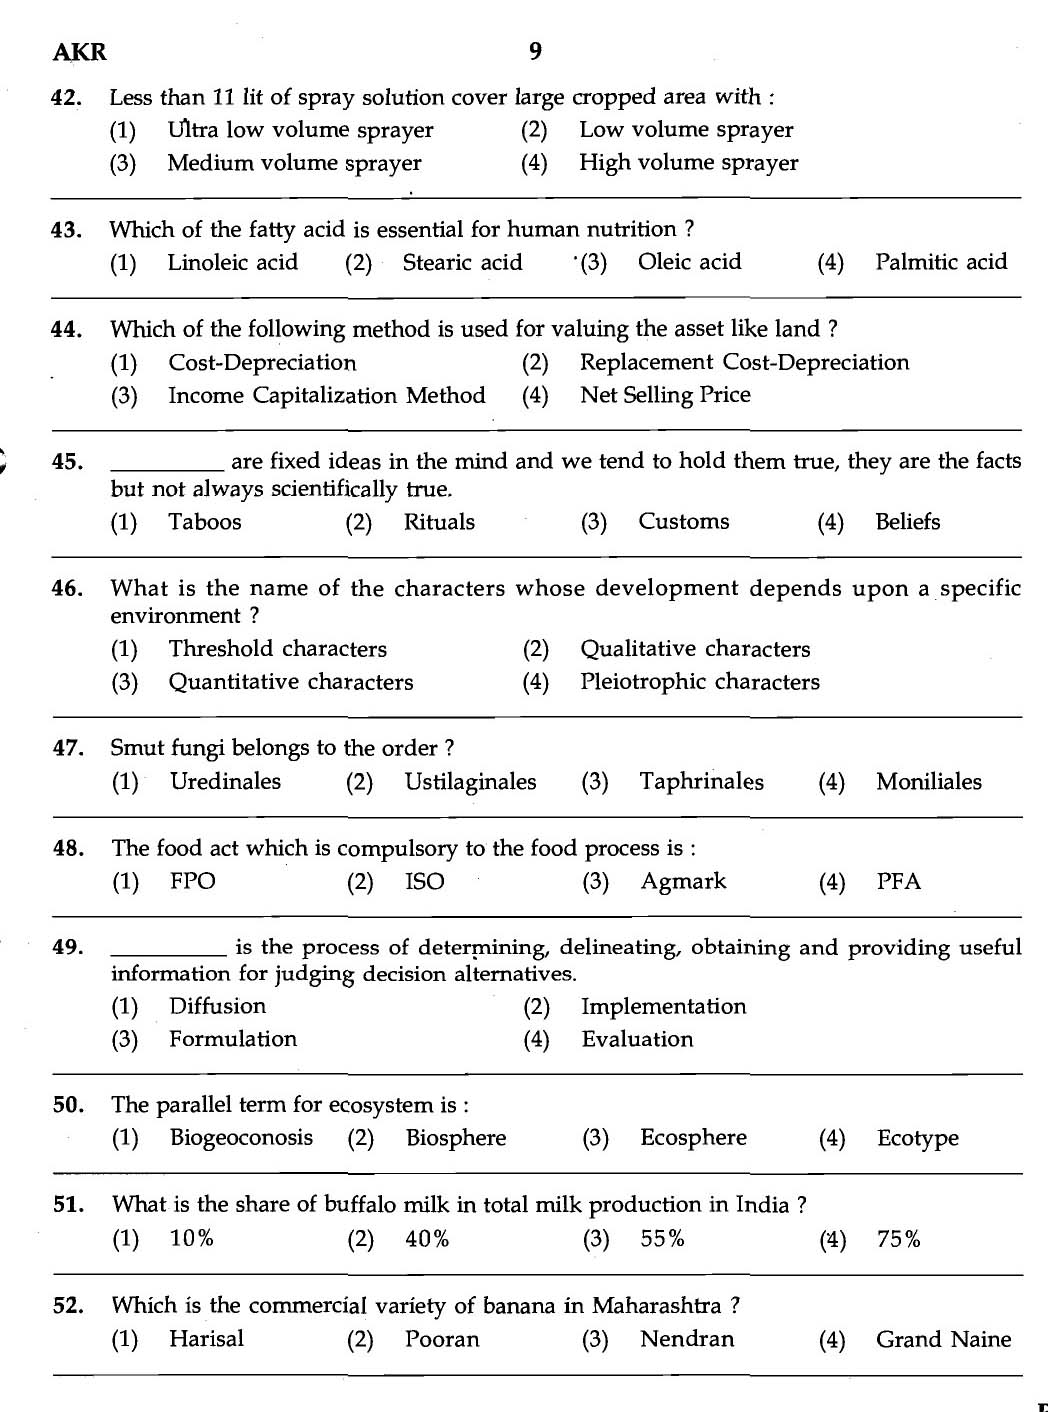 MPSC Agricultural Services Exam 2007 Question Paper Agriculture 7